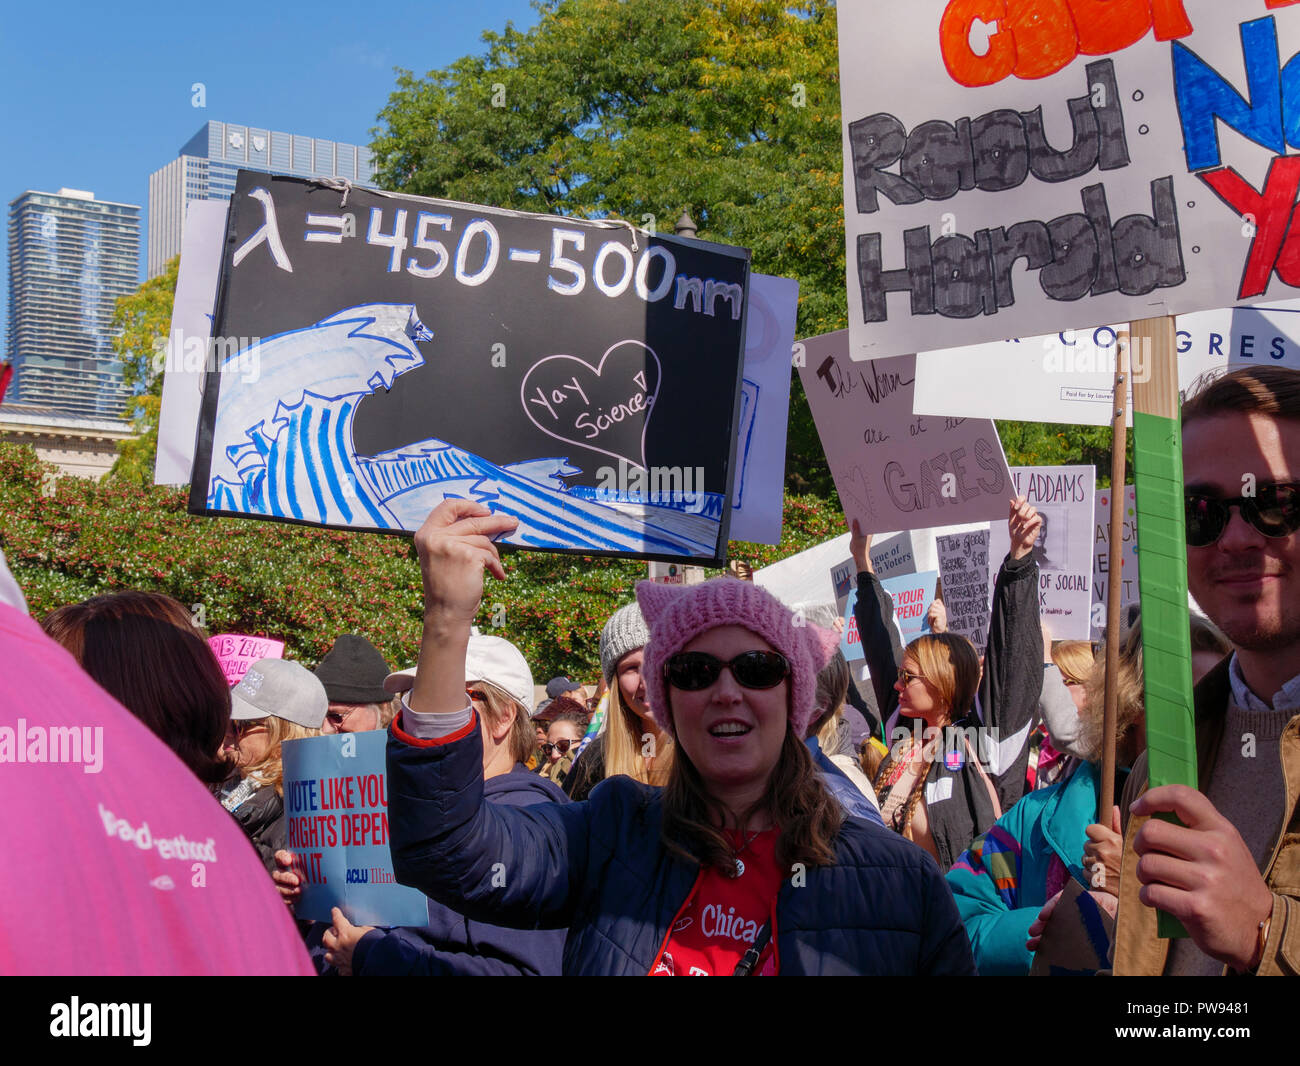 Chicago, Illinois, USA. 13th October 2018. A protester at today's woman's rally and march holds a science base sign predicting a blue wave in midterm elections this November. The formula shows th wavelengths of blue light, 450-500 nanometers. Credit: Todd Bannor/Alamy Live News Stock Photo